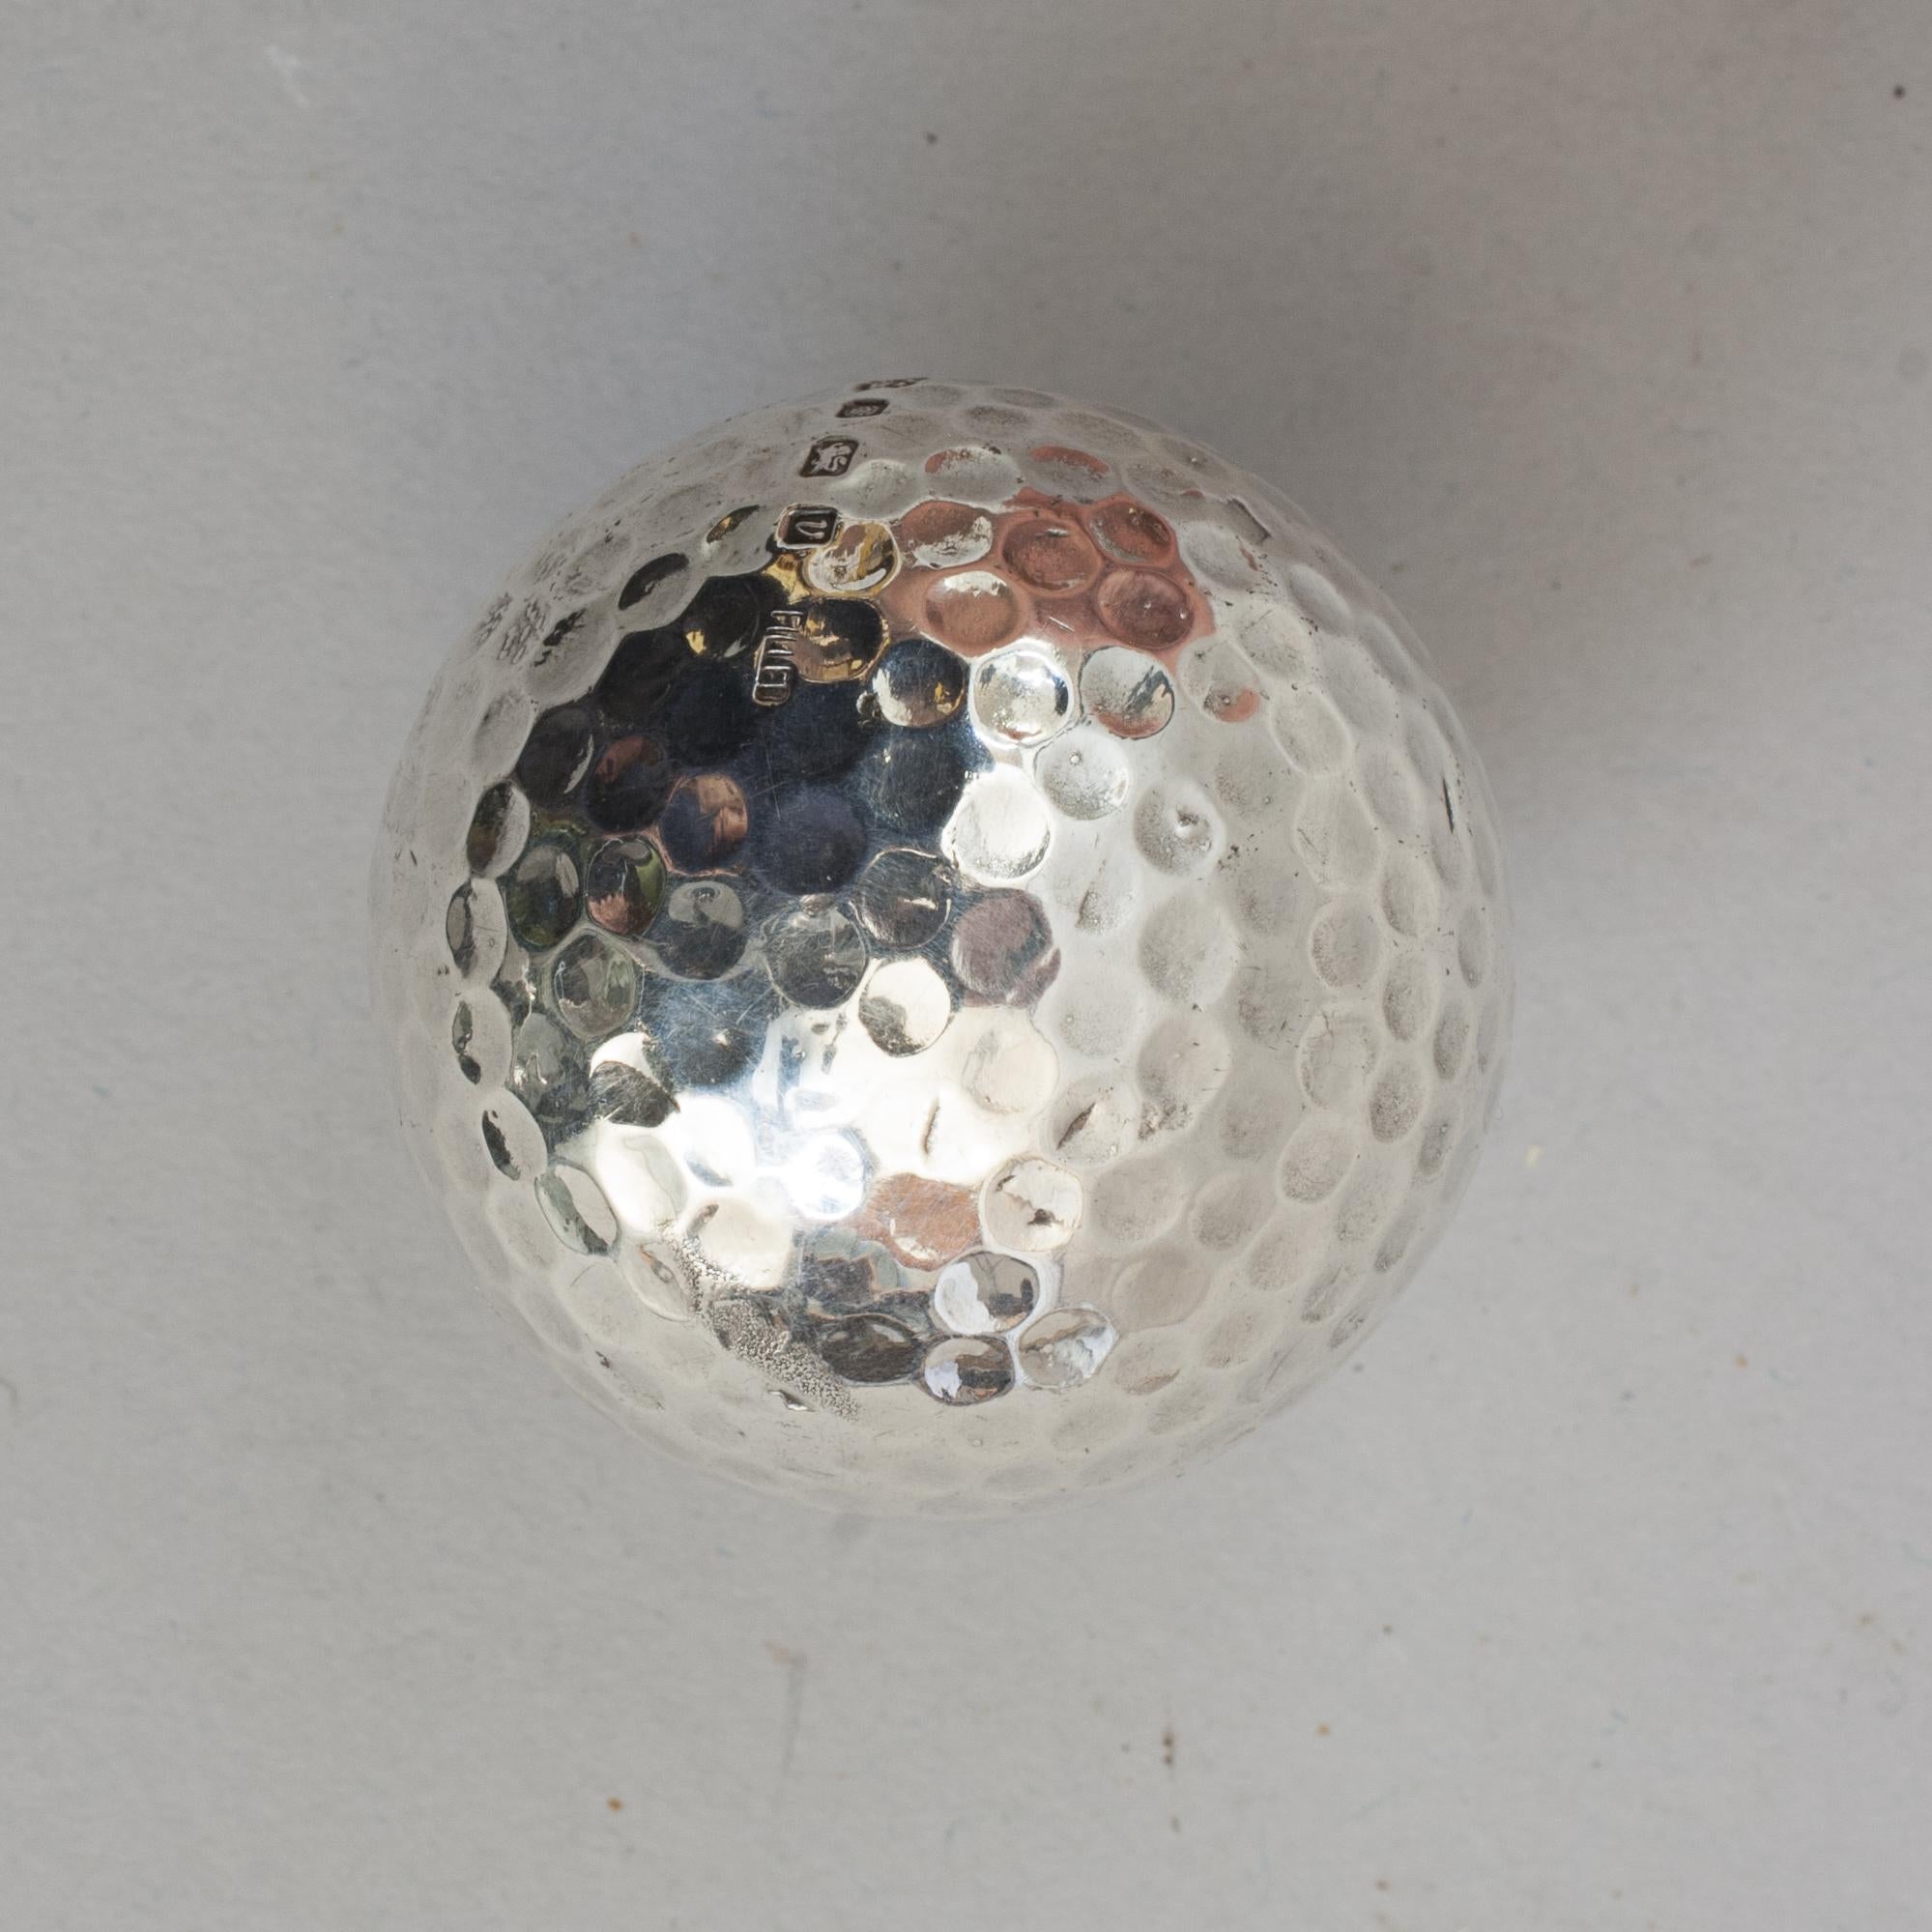 Hallmarked Silver Golf Ball.
An unusual silver golf ball, made by Chantry Silversmiths with a filled center and hallmarked Sheffield 1995. The dimple patterned silver golf ball stamped 'CS' (Chantry Silversmiths) with Sheffield Rose Assay Office